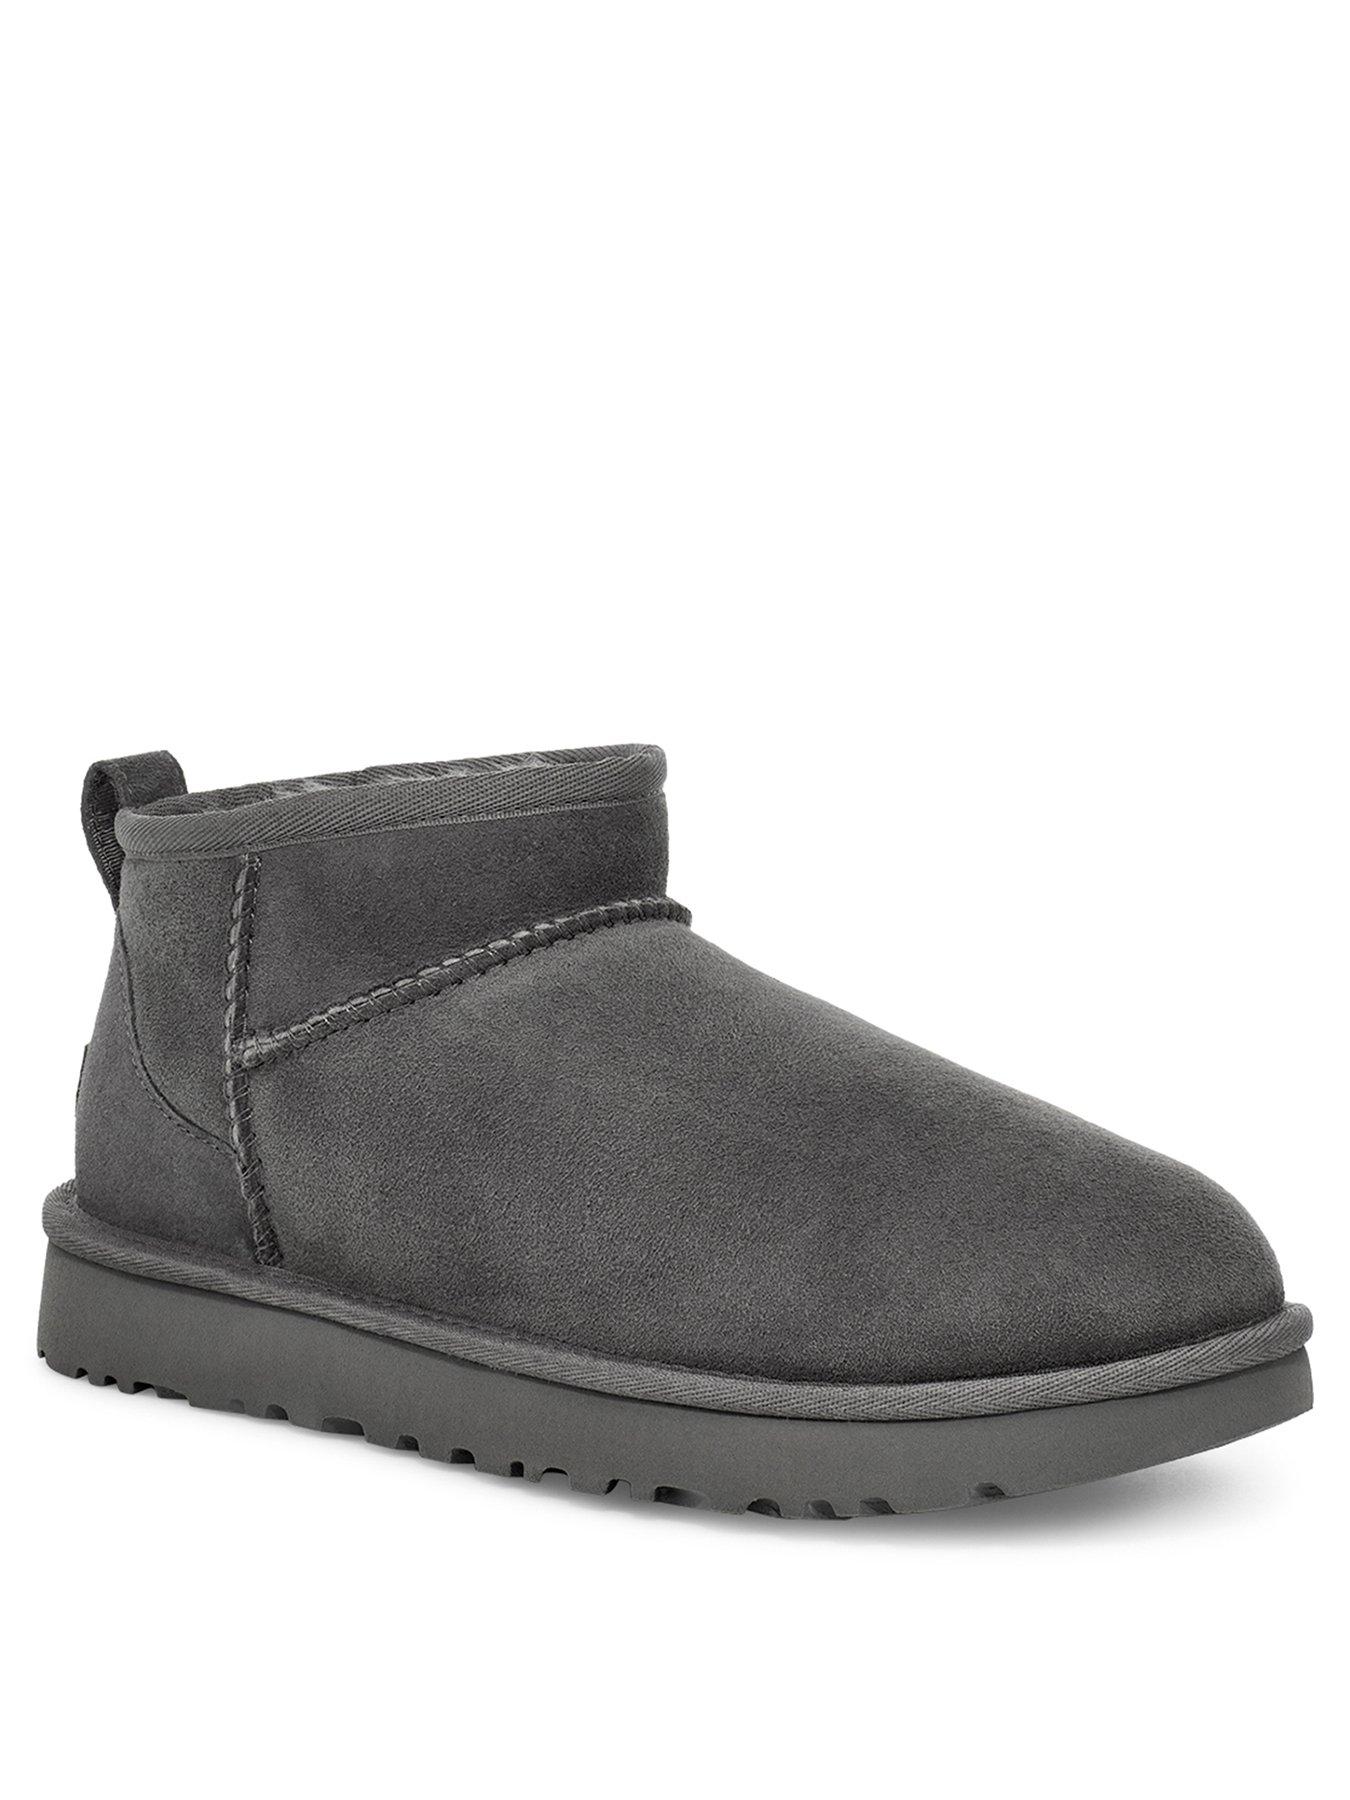 grey low ugg boots